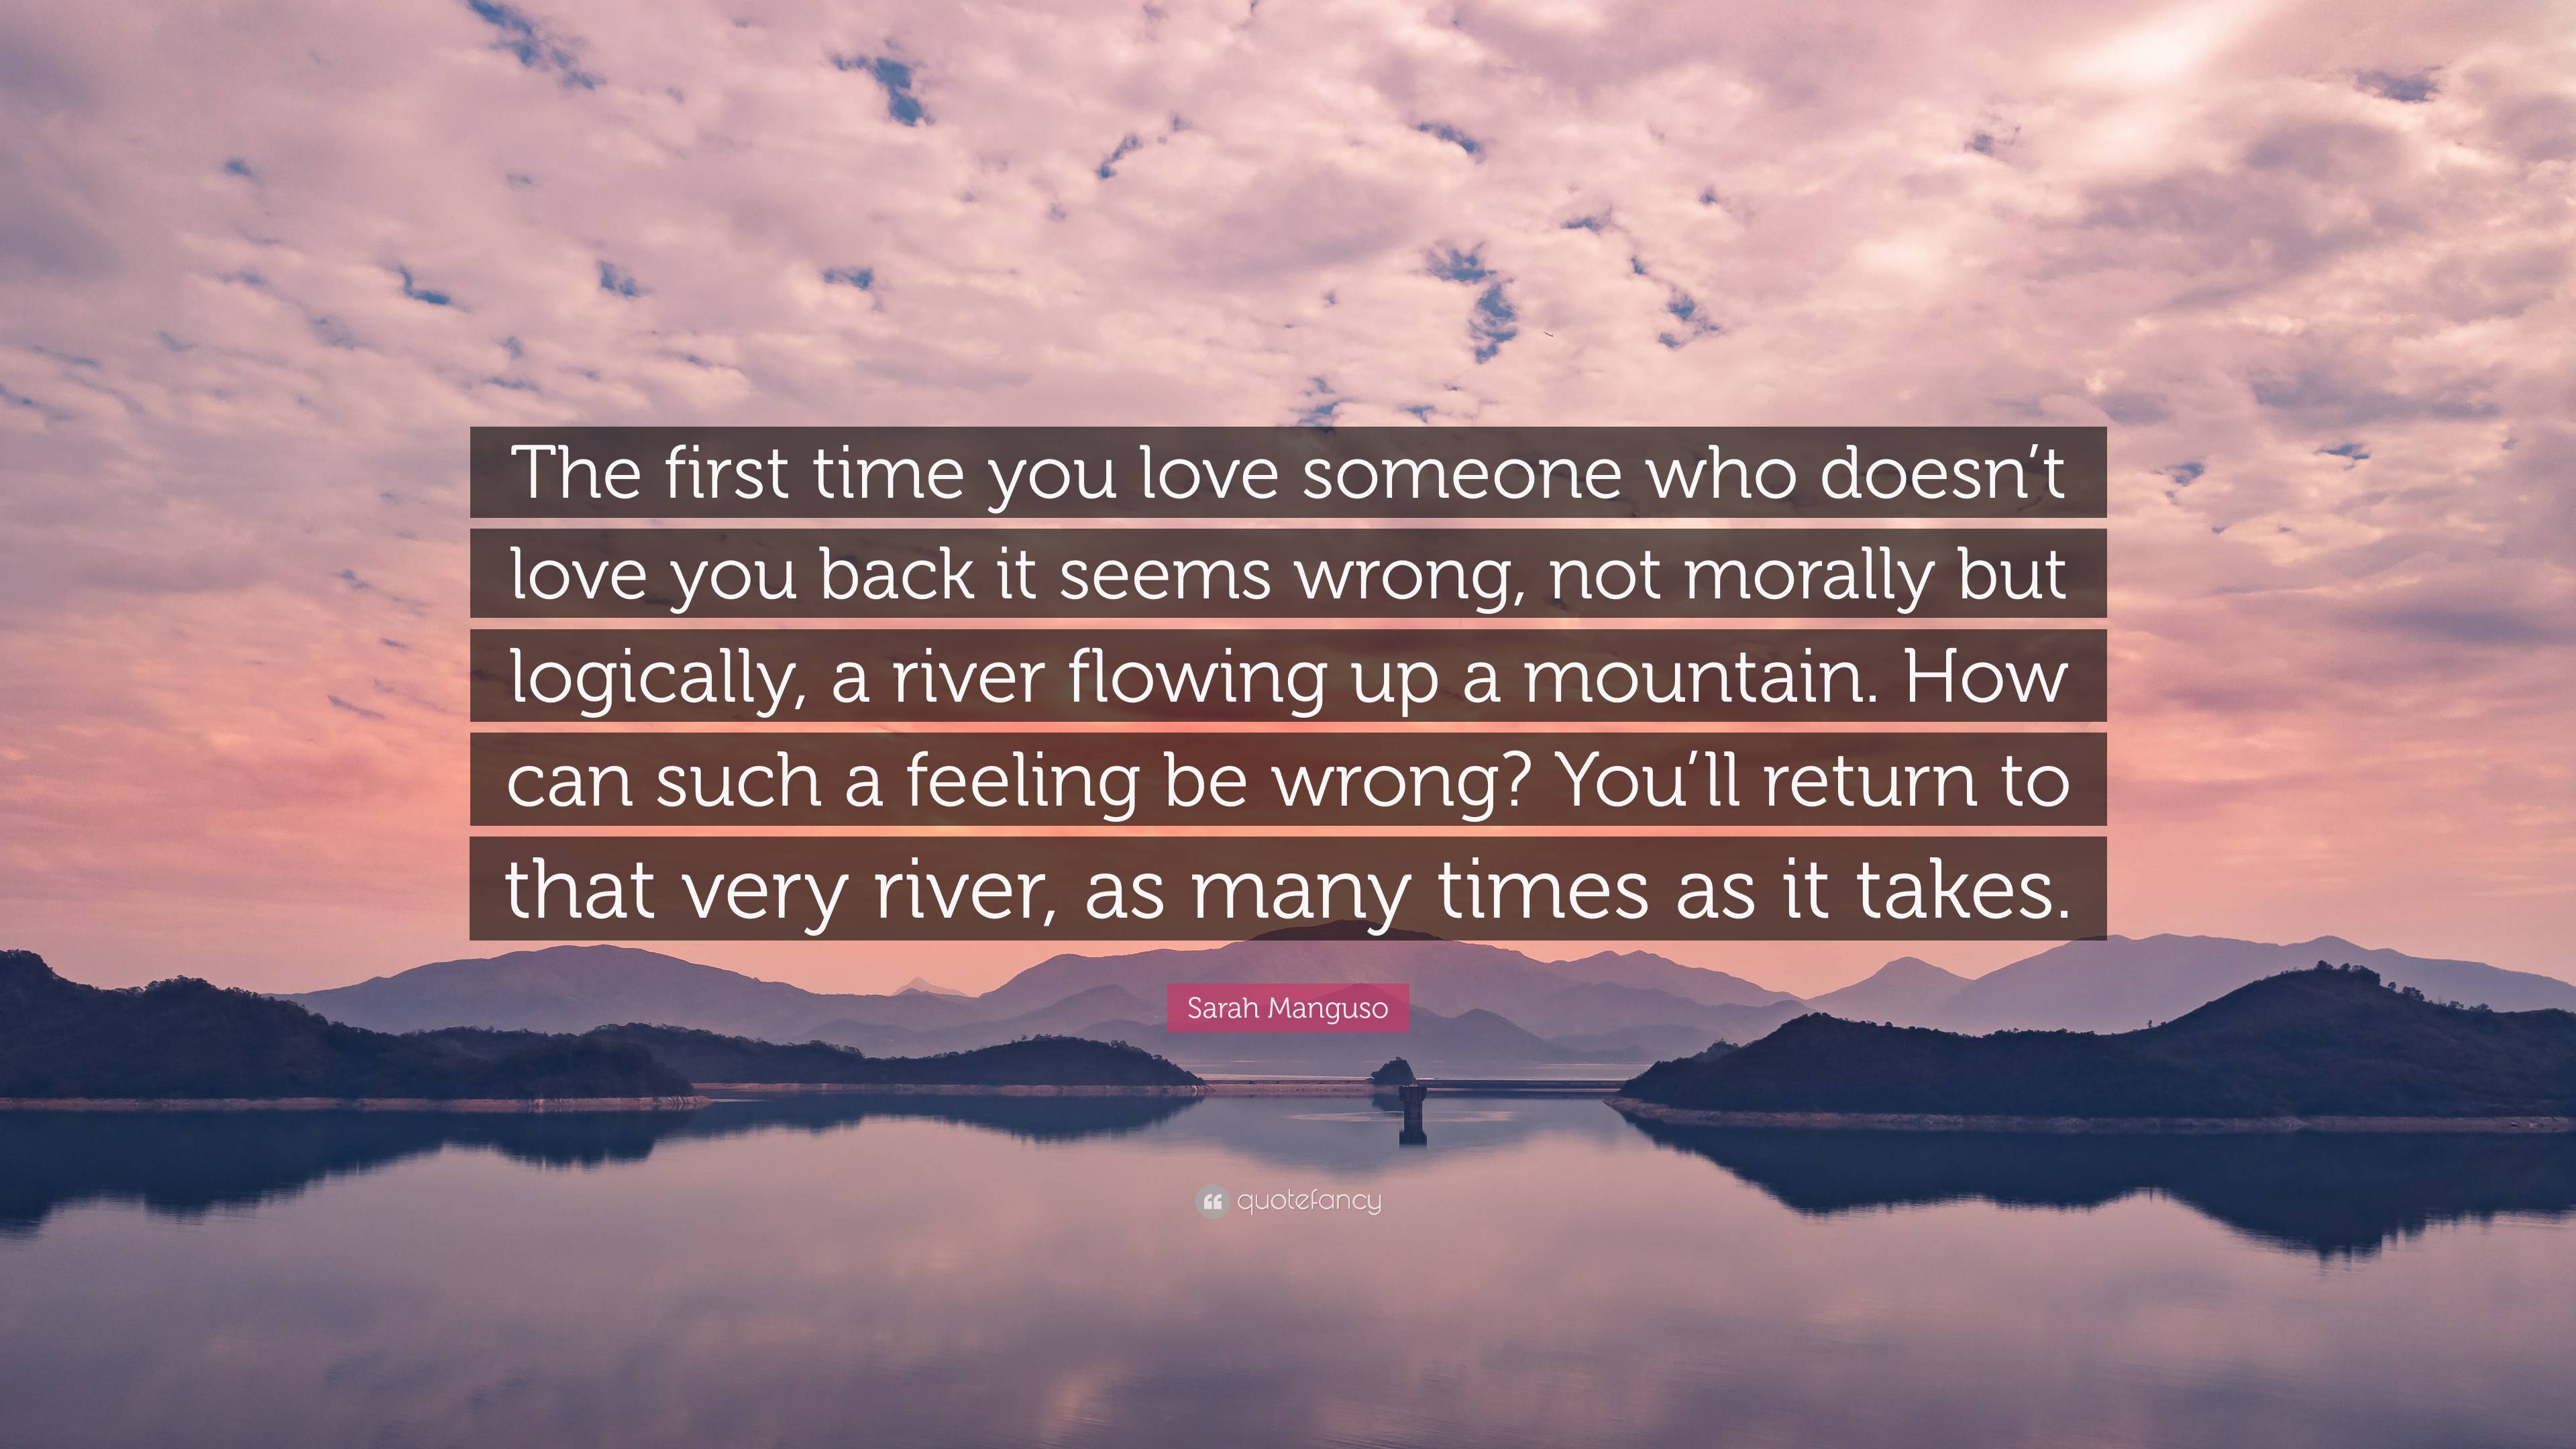 Sarah Manguso Quote: “The first time you love someone who doesn’t love ...